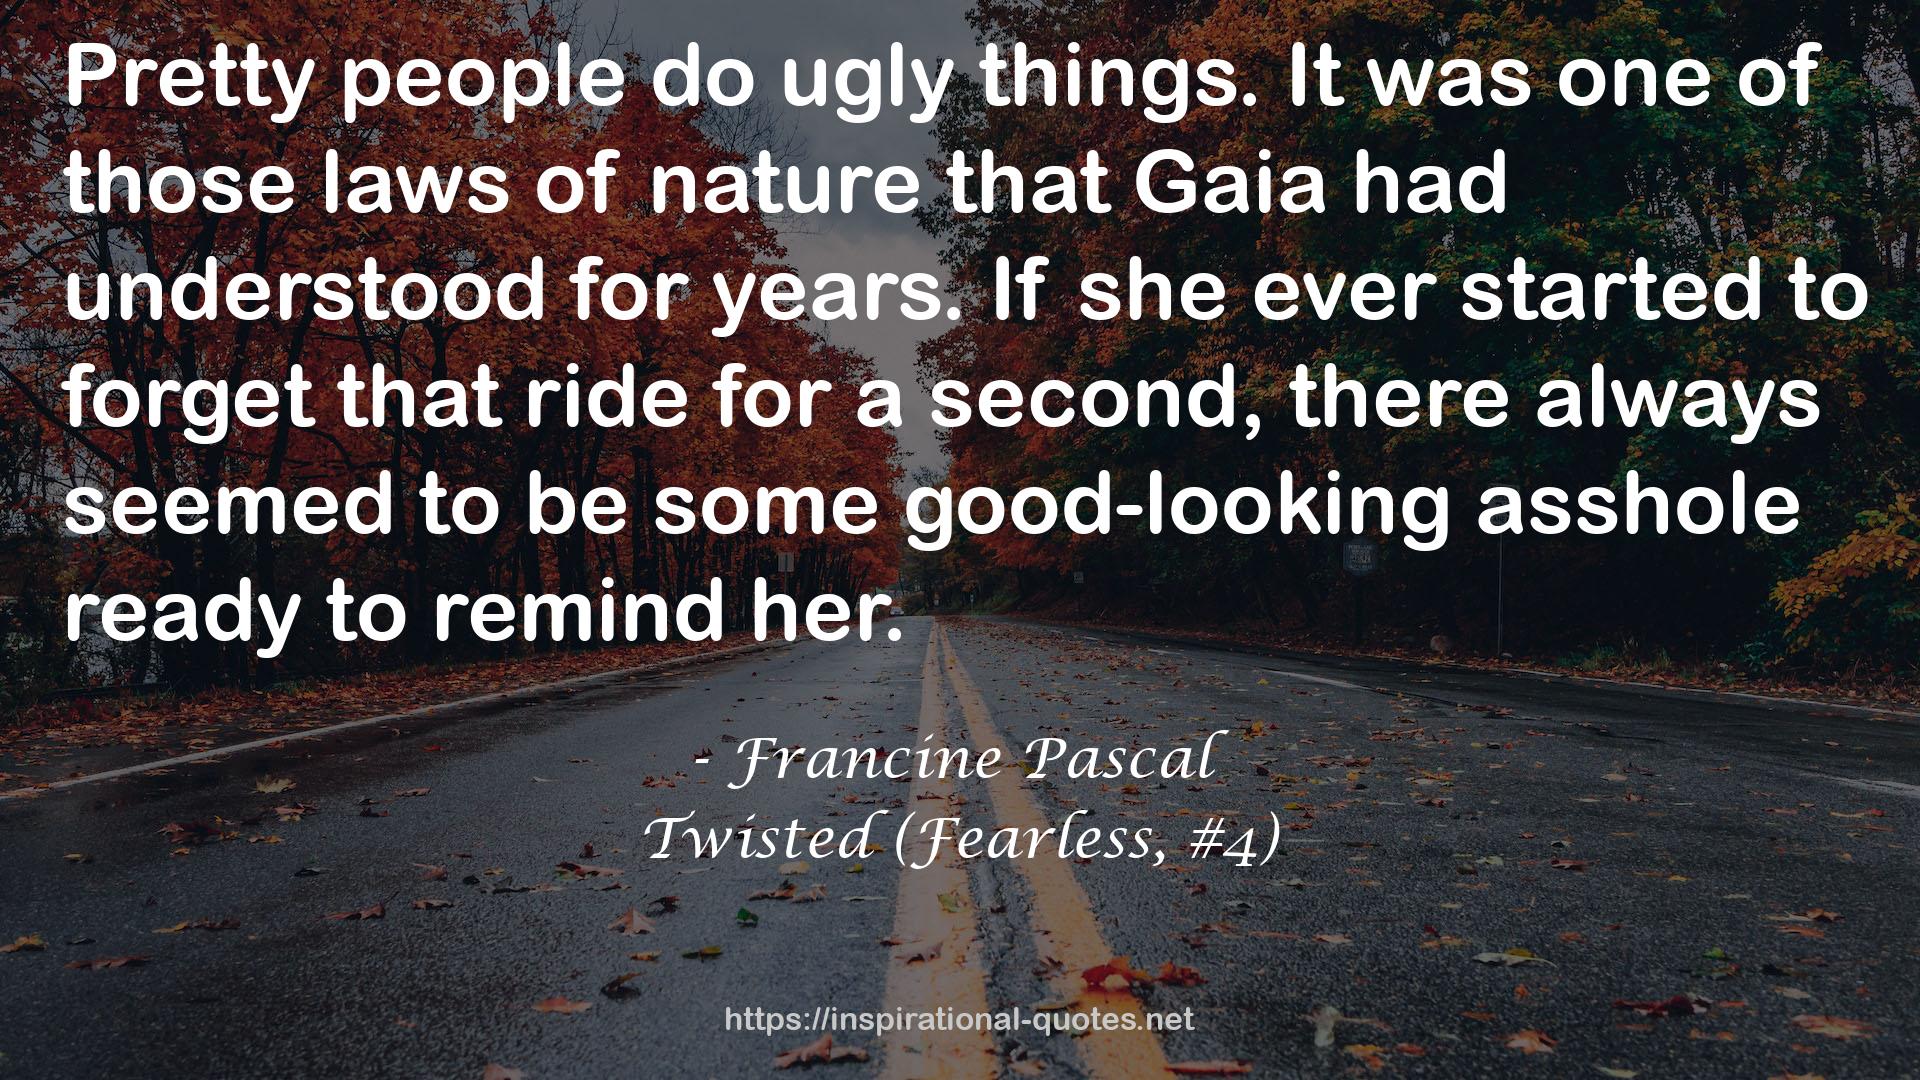 Twisted (Fearless, #4) QUOTES